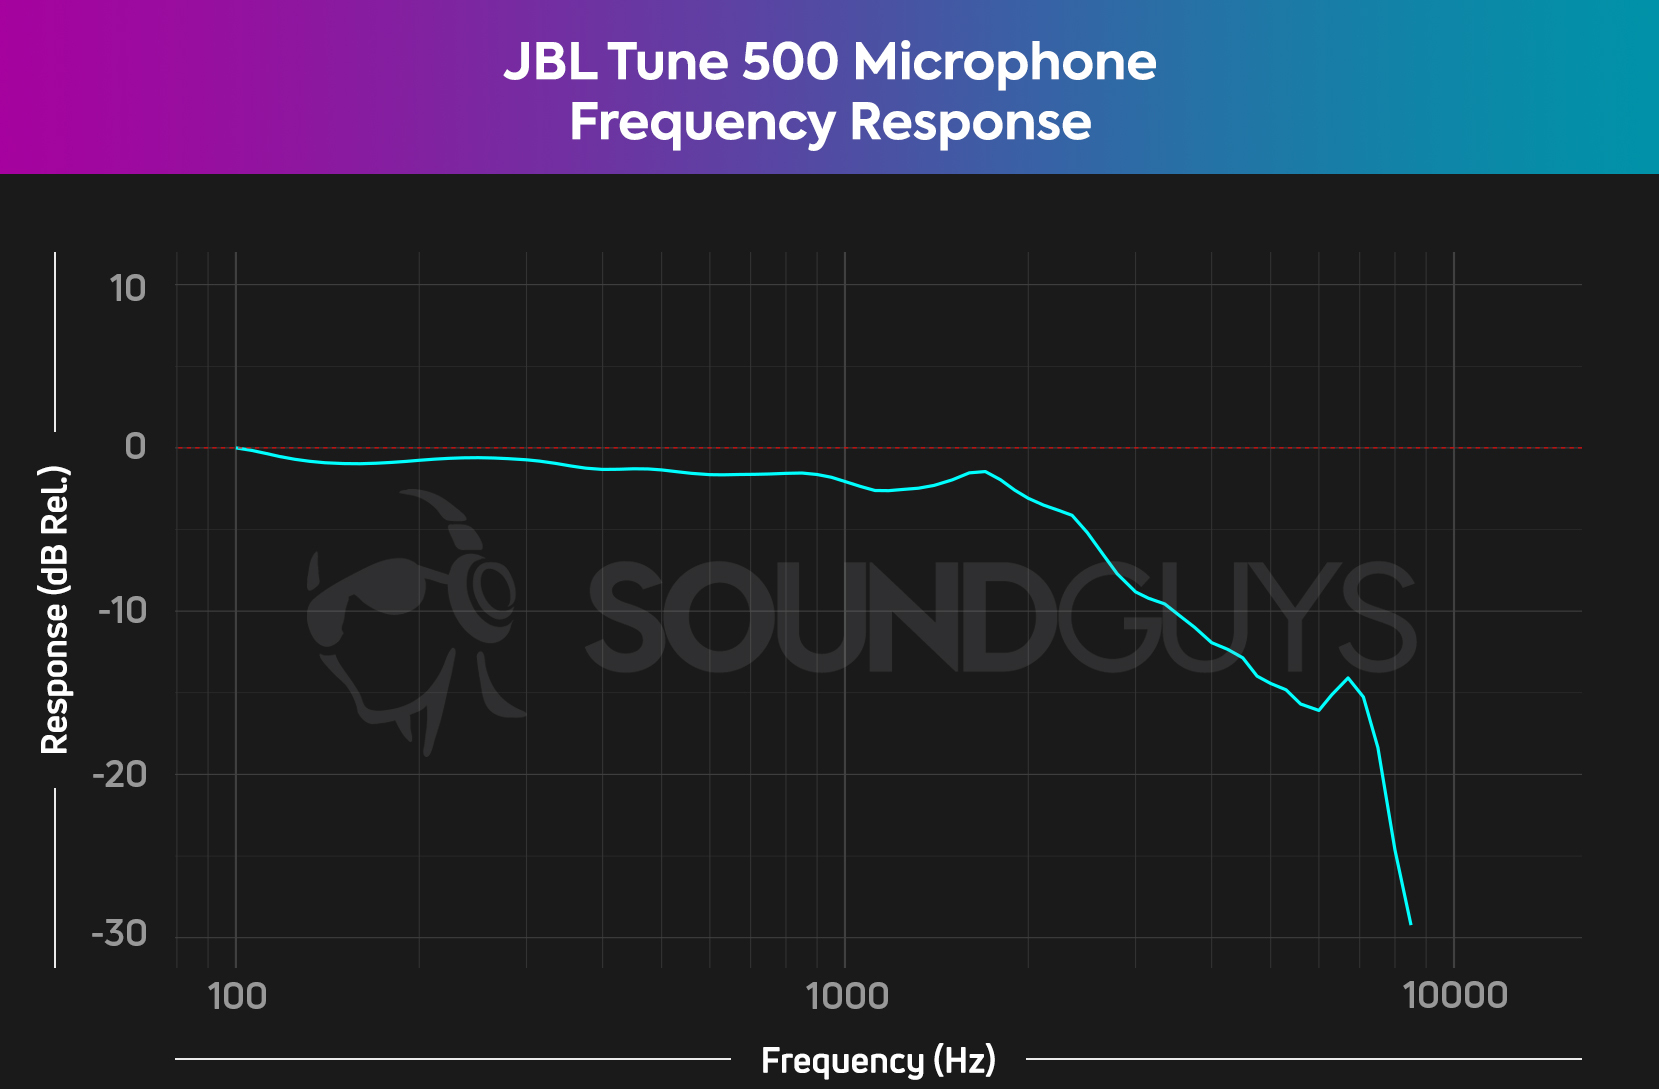 The JBL Tune 500 microphone frequency response, showing a flat low end response and a sharp decrease in the mid and high end.